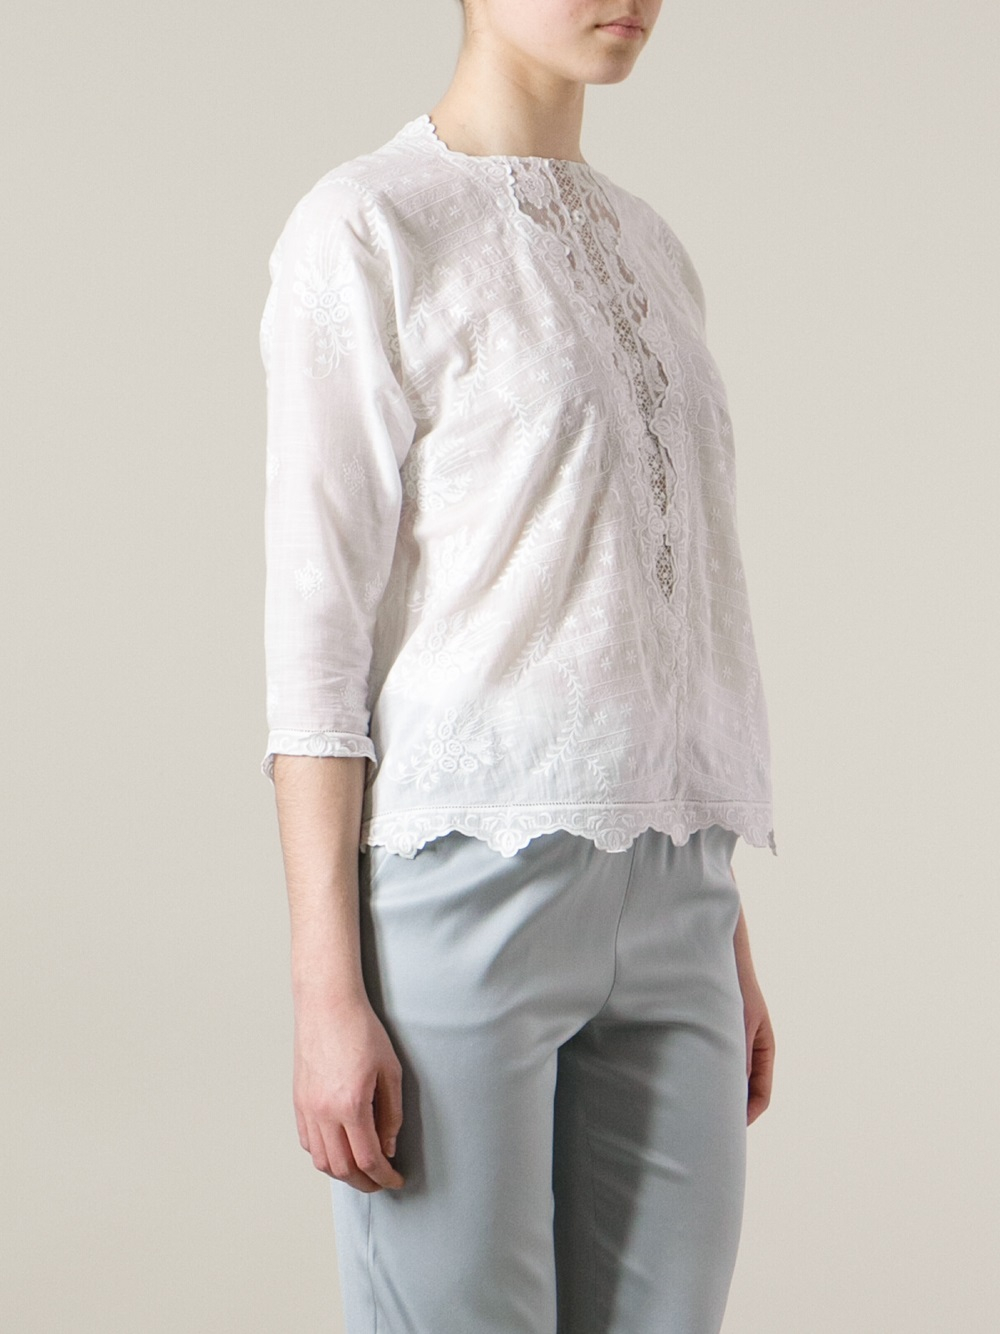 Vanessa Bruno Albane Embroidered Blouse in White | Lyst